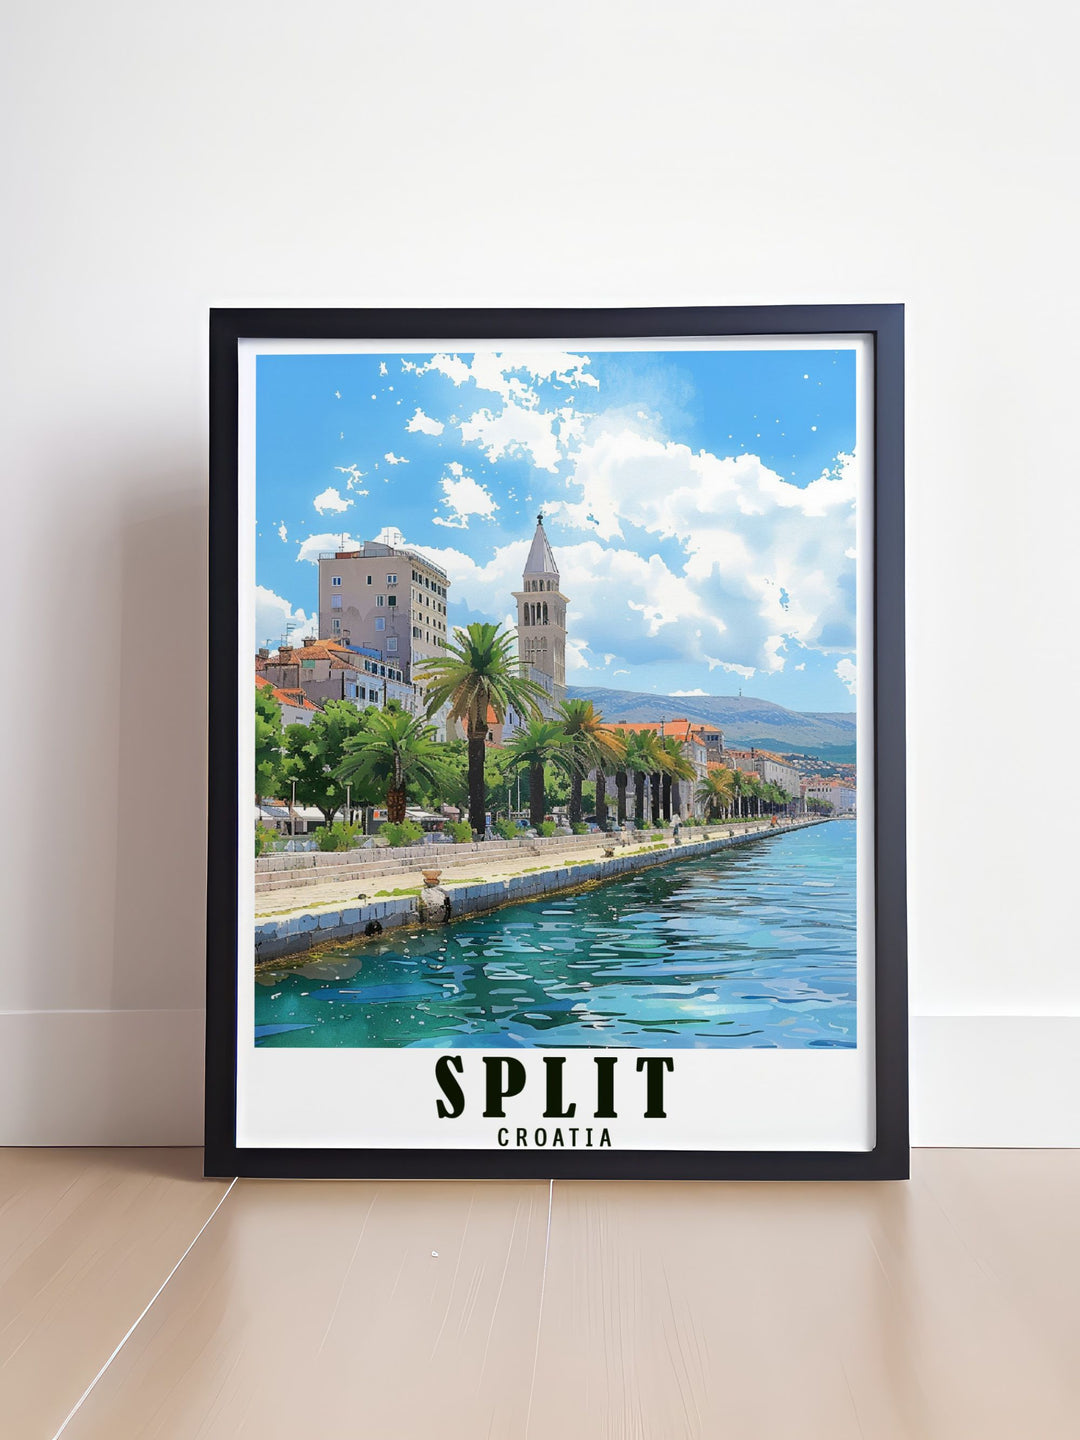 The vibrant promenade and historic significance of Split are depicted in this travel poster, showcasing the natural beauty and cultural richness that define Croatia.